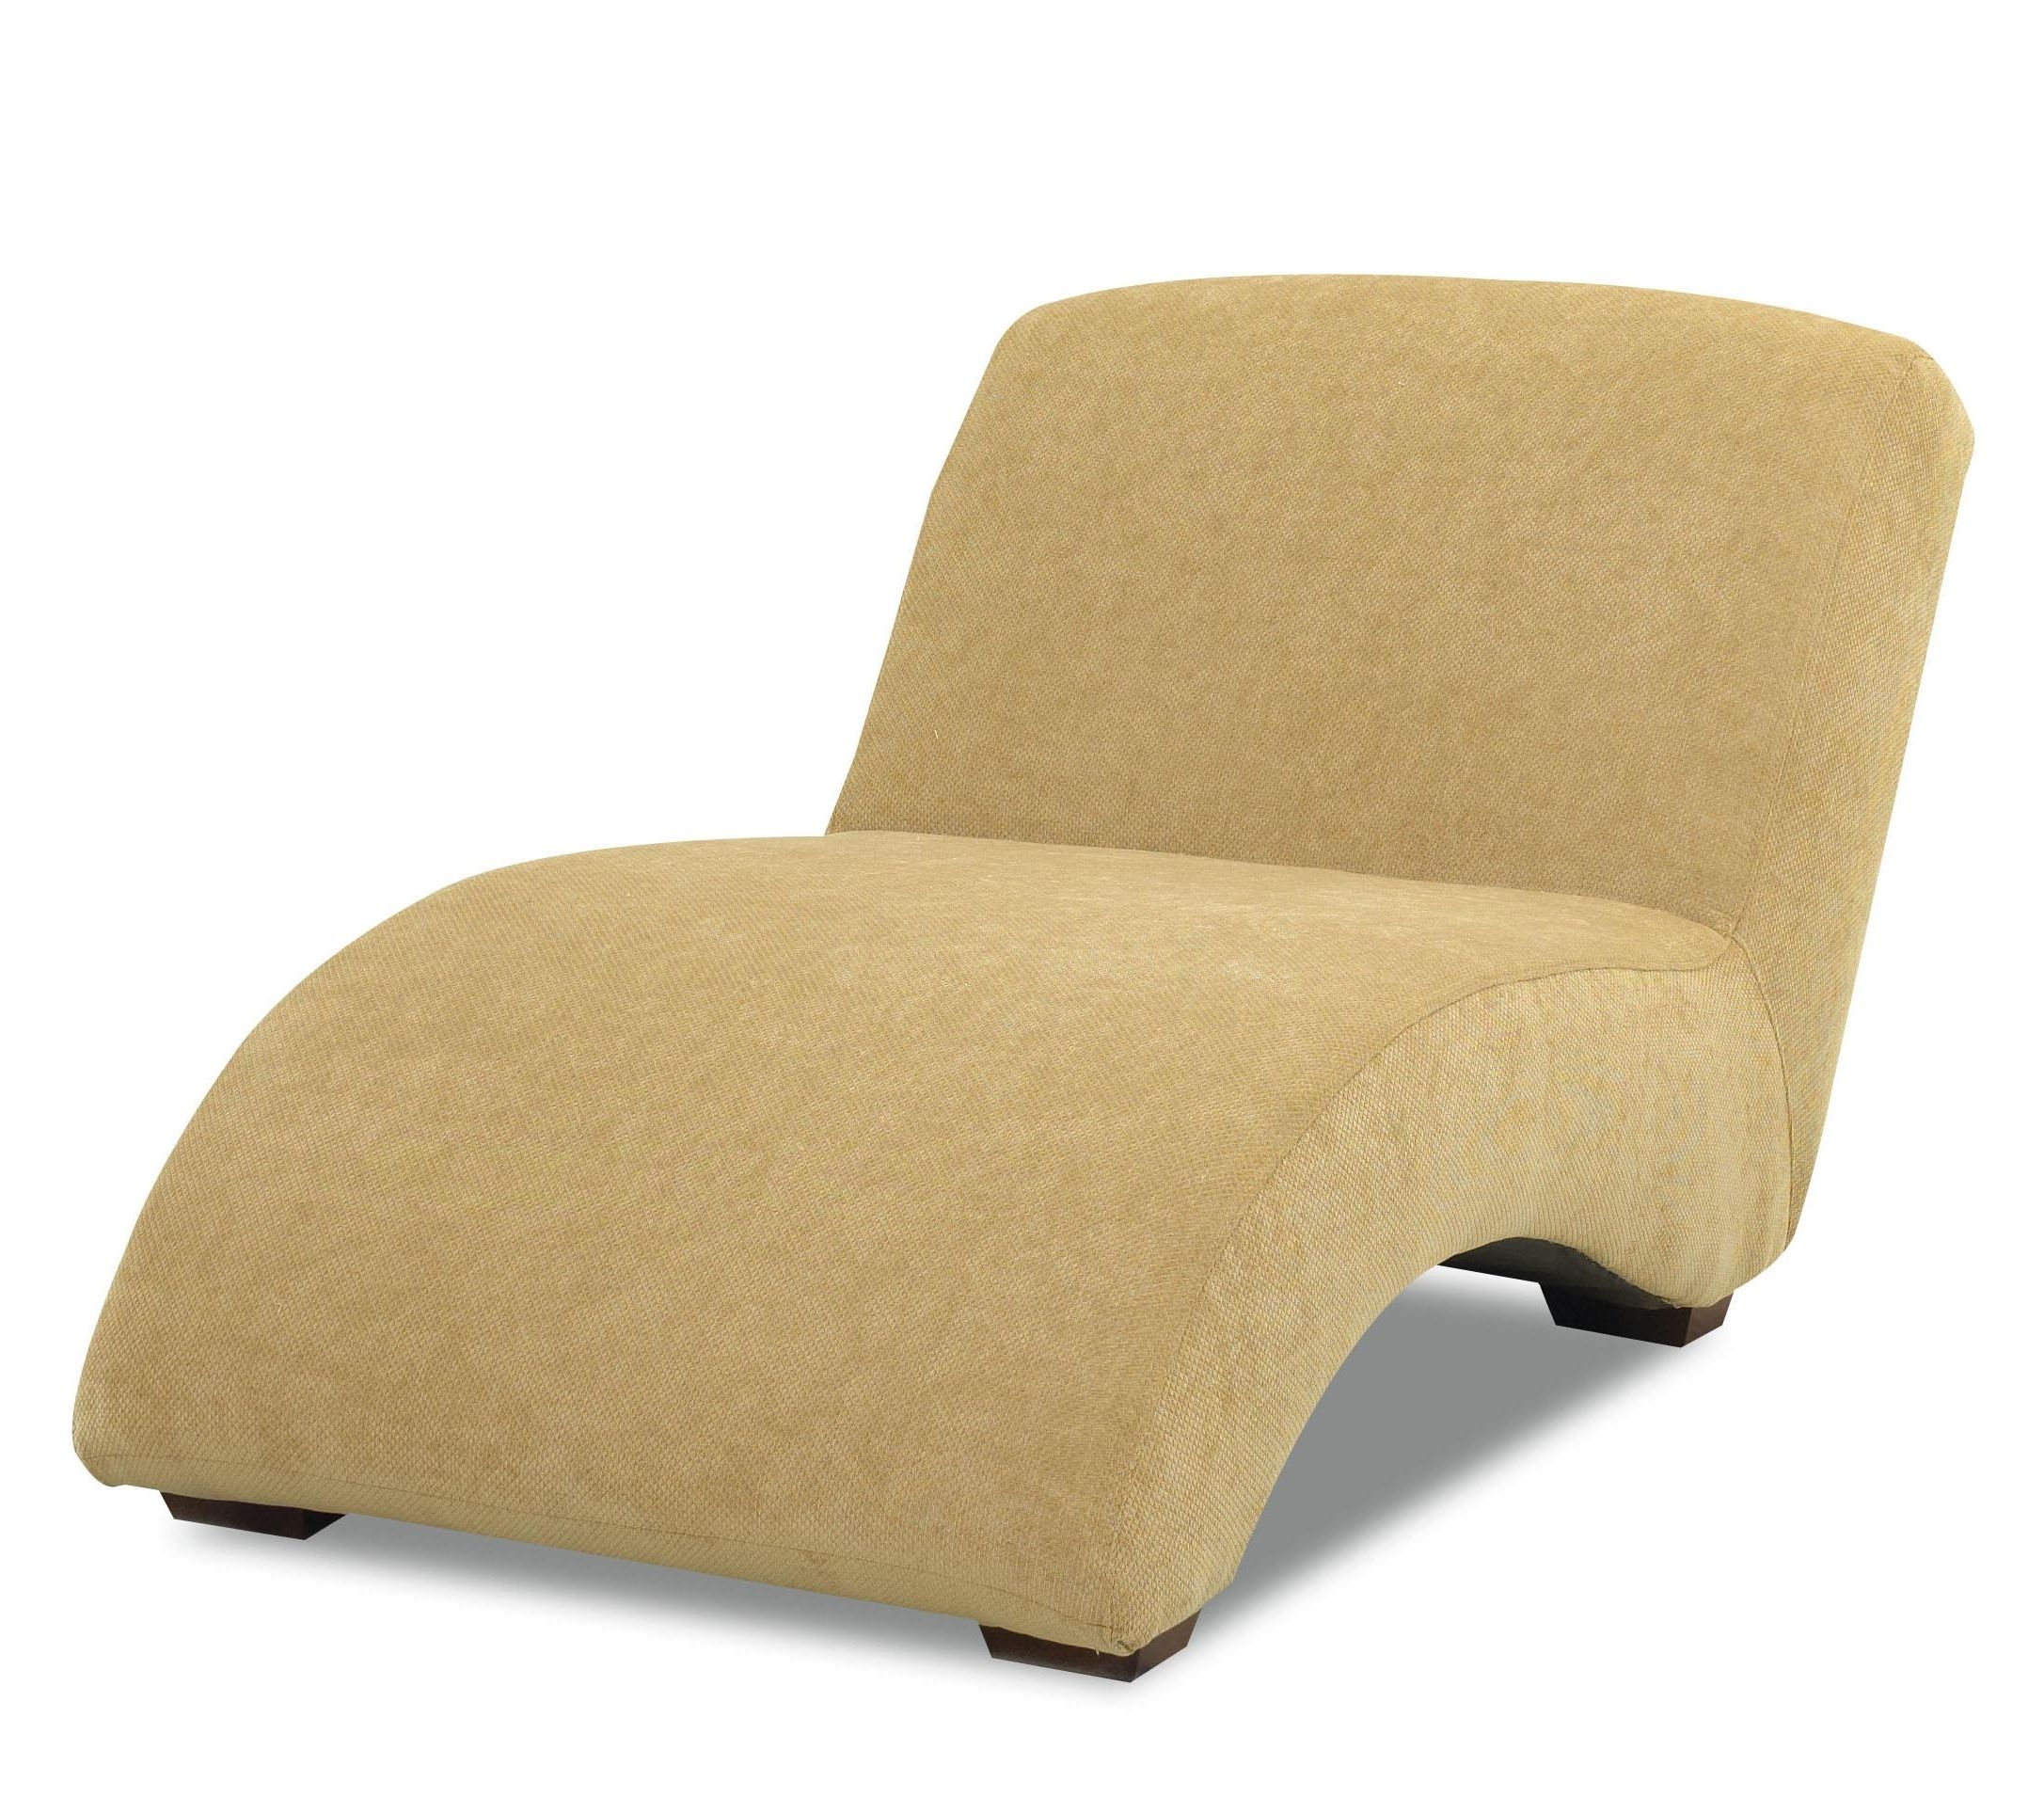 Best And Newest Klaussner Chaise Lounge Chairs Throughout Klaussner Chairs And Accents Oversized Celebration Armless Chaise (View 11 of 15)